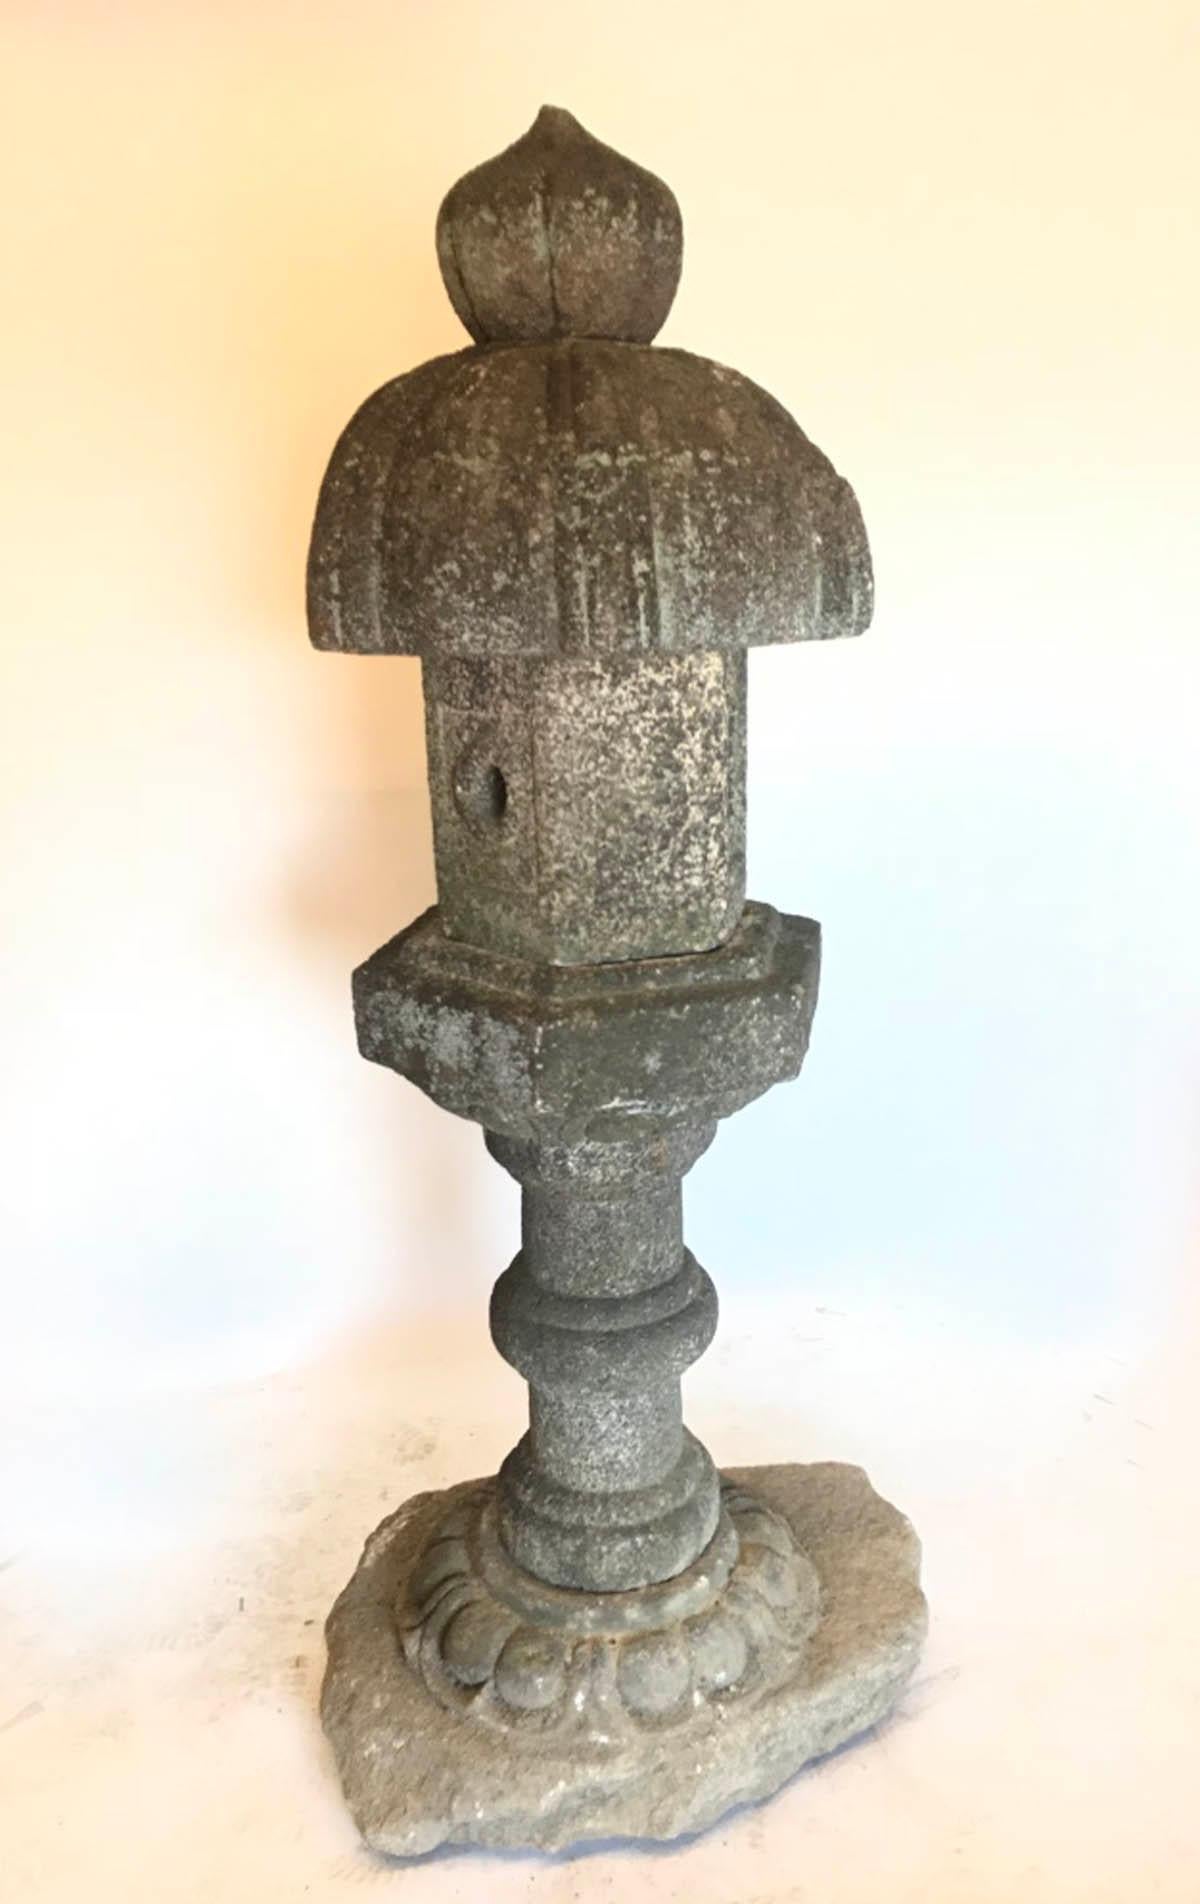 18th-19th century, Edo period Japanese stone (granite) lantern, carved. Base bottom piece remains attached on the stone it was carved from which gives it a natural transition from nature to lantern. It consists of six pieces. A light or candle is